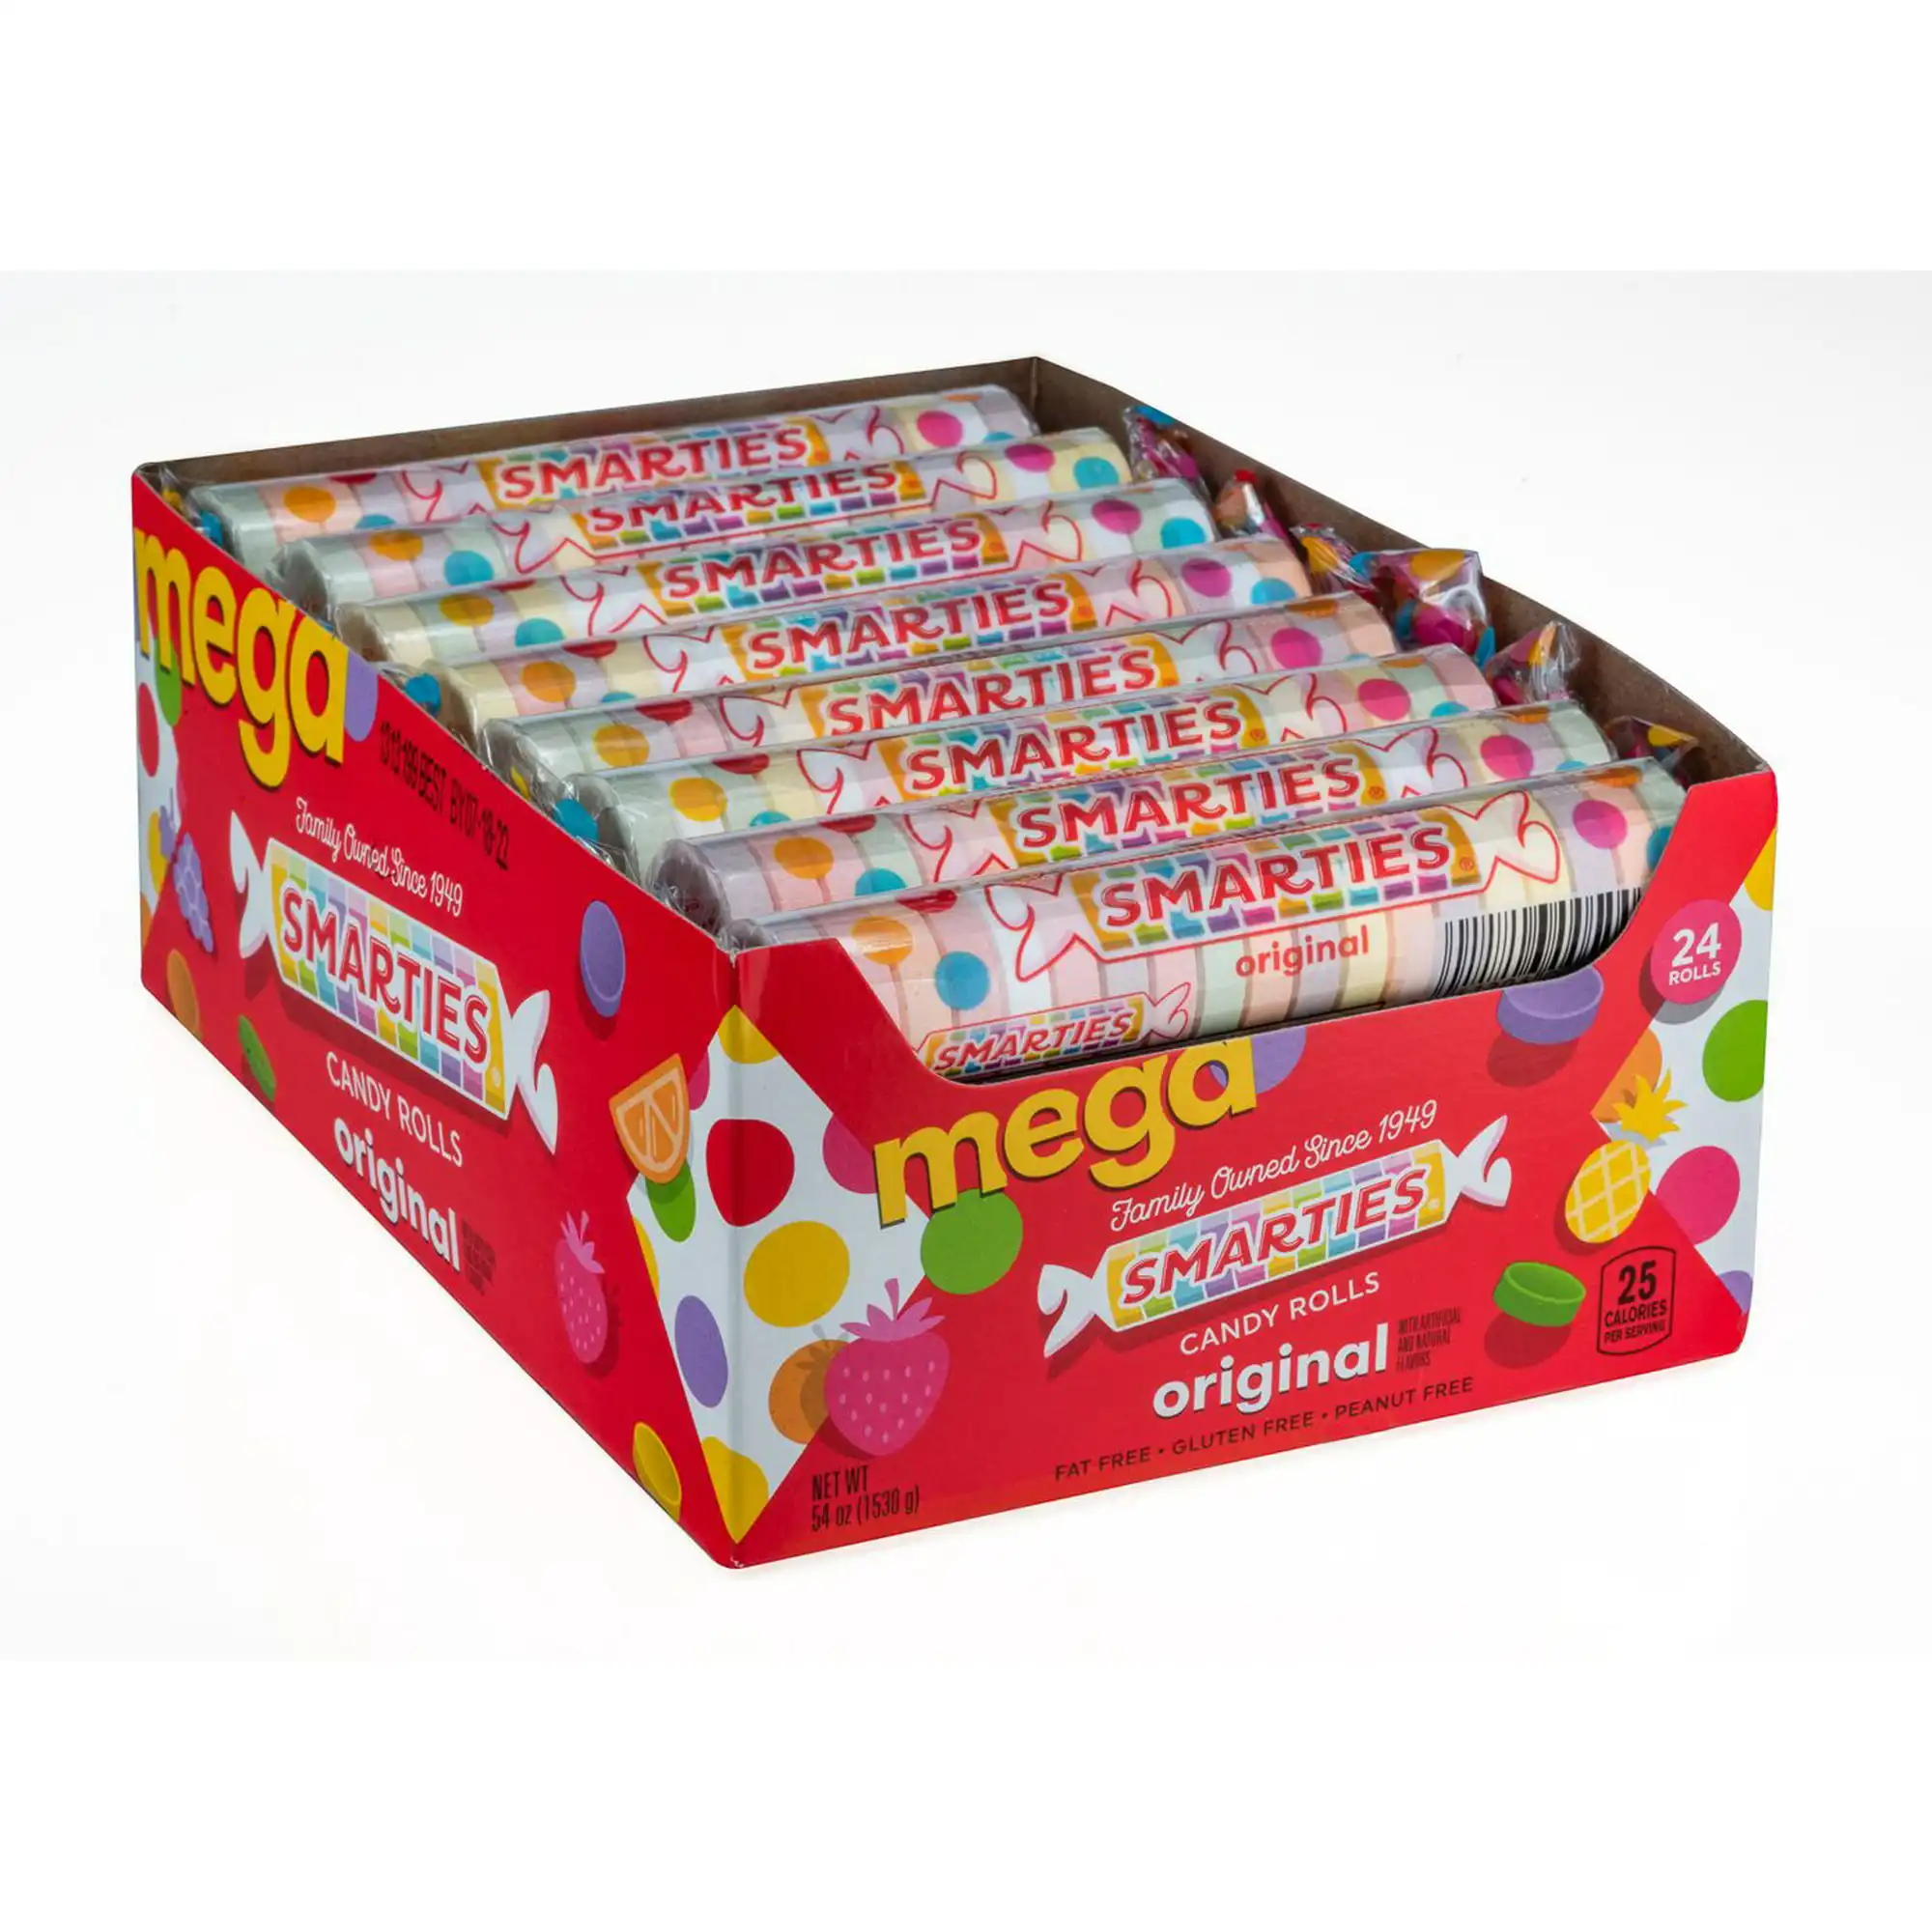 High On Demand Candy, Smarties Hard Candy, Original 15 Tablet Rolls Assorted Flavors, Individually Wrapped (Half-Pound)